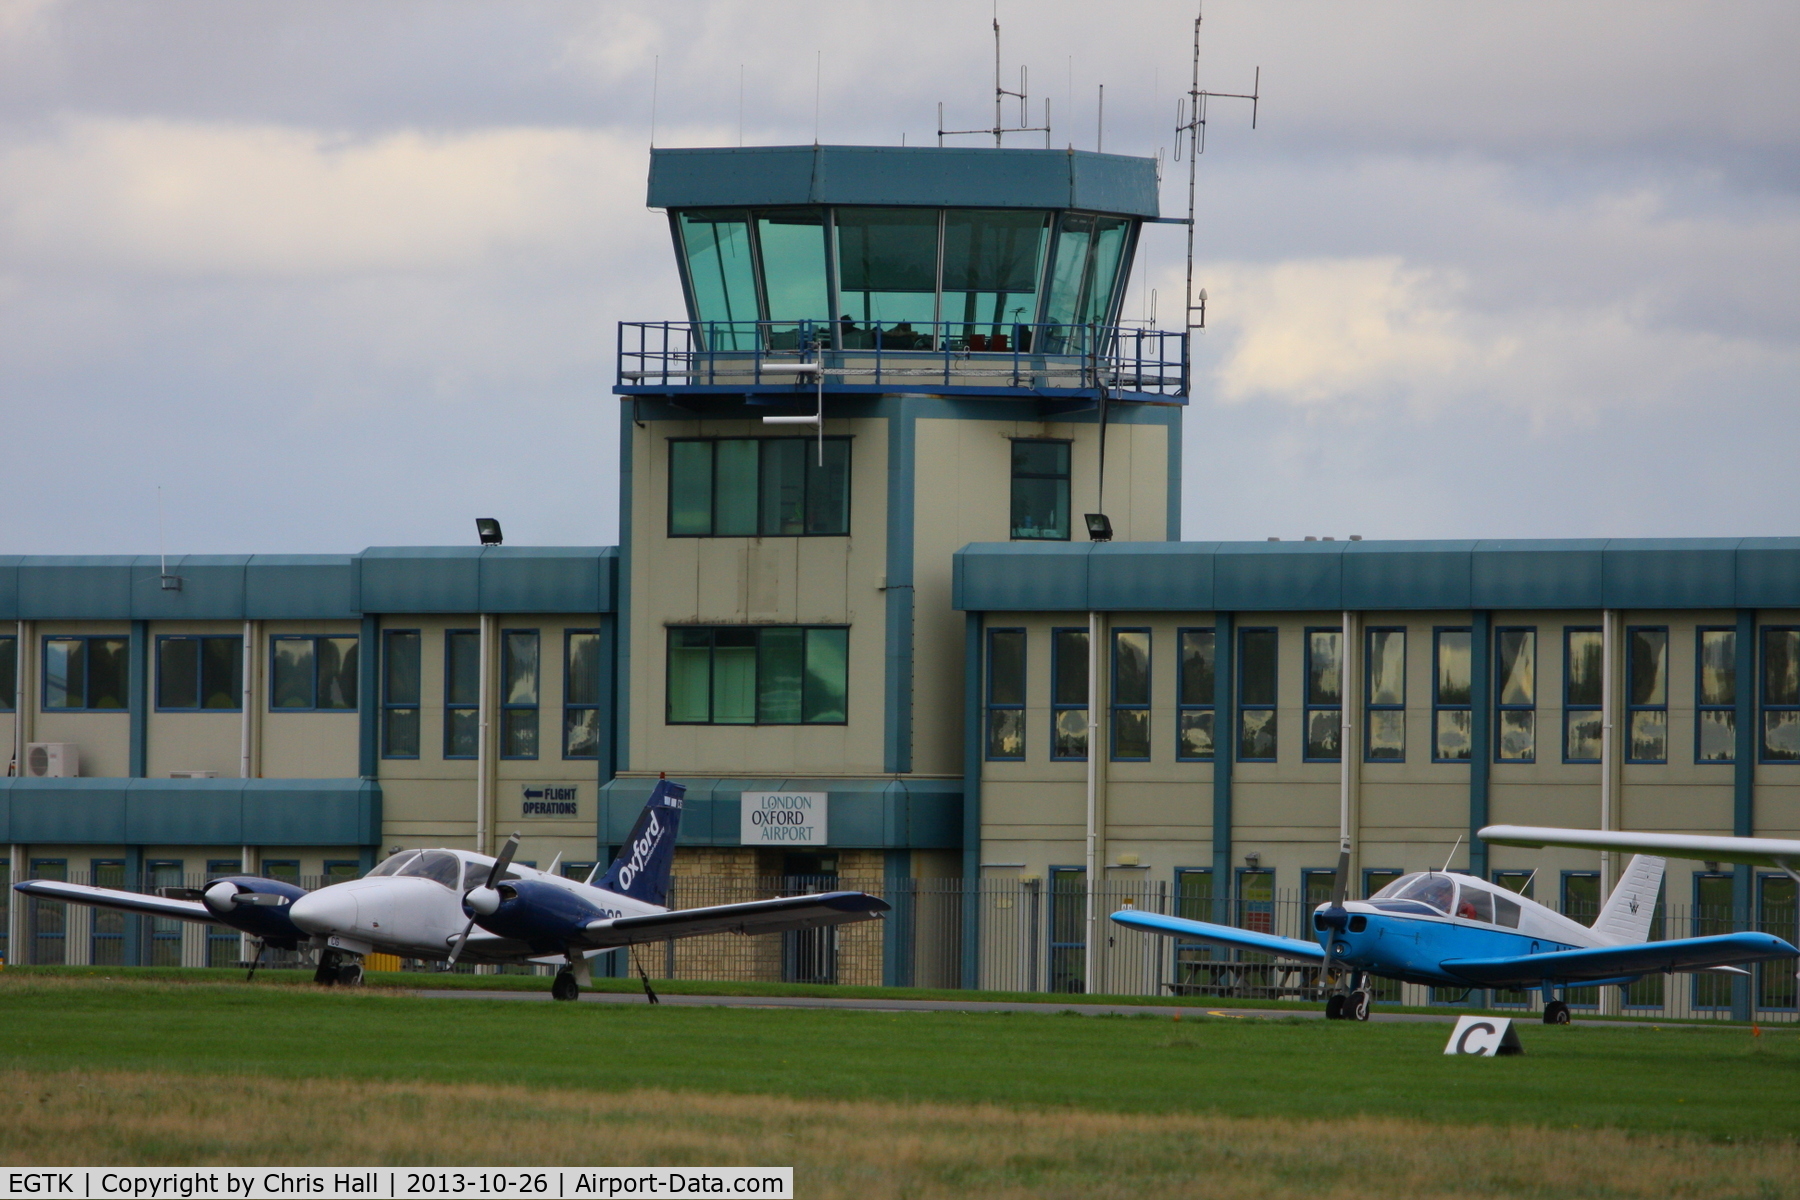 Oxford Airport, Oxford, England United Kingdom (EGTK) - Oxford Airport tower and terminal building